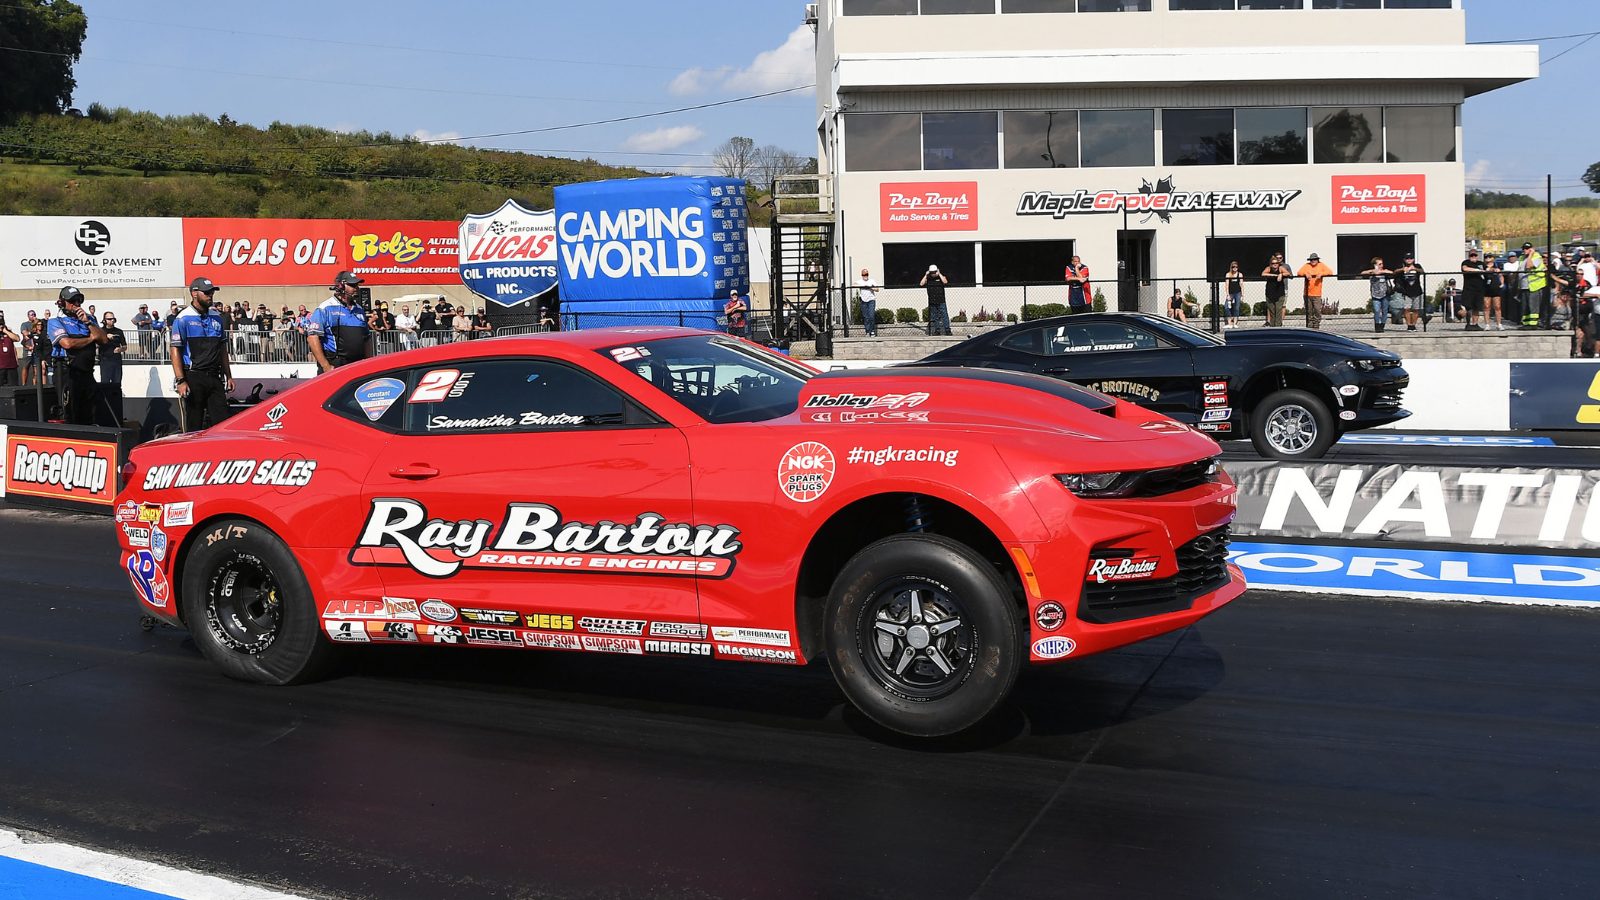  Factory Stock Showdown Championship to be Decided at Texas NHRA Fall Nationals 